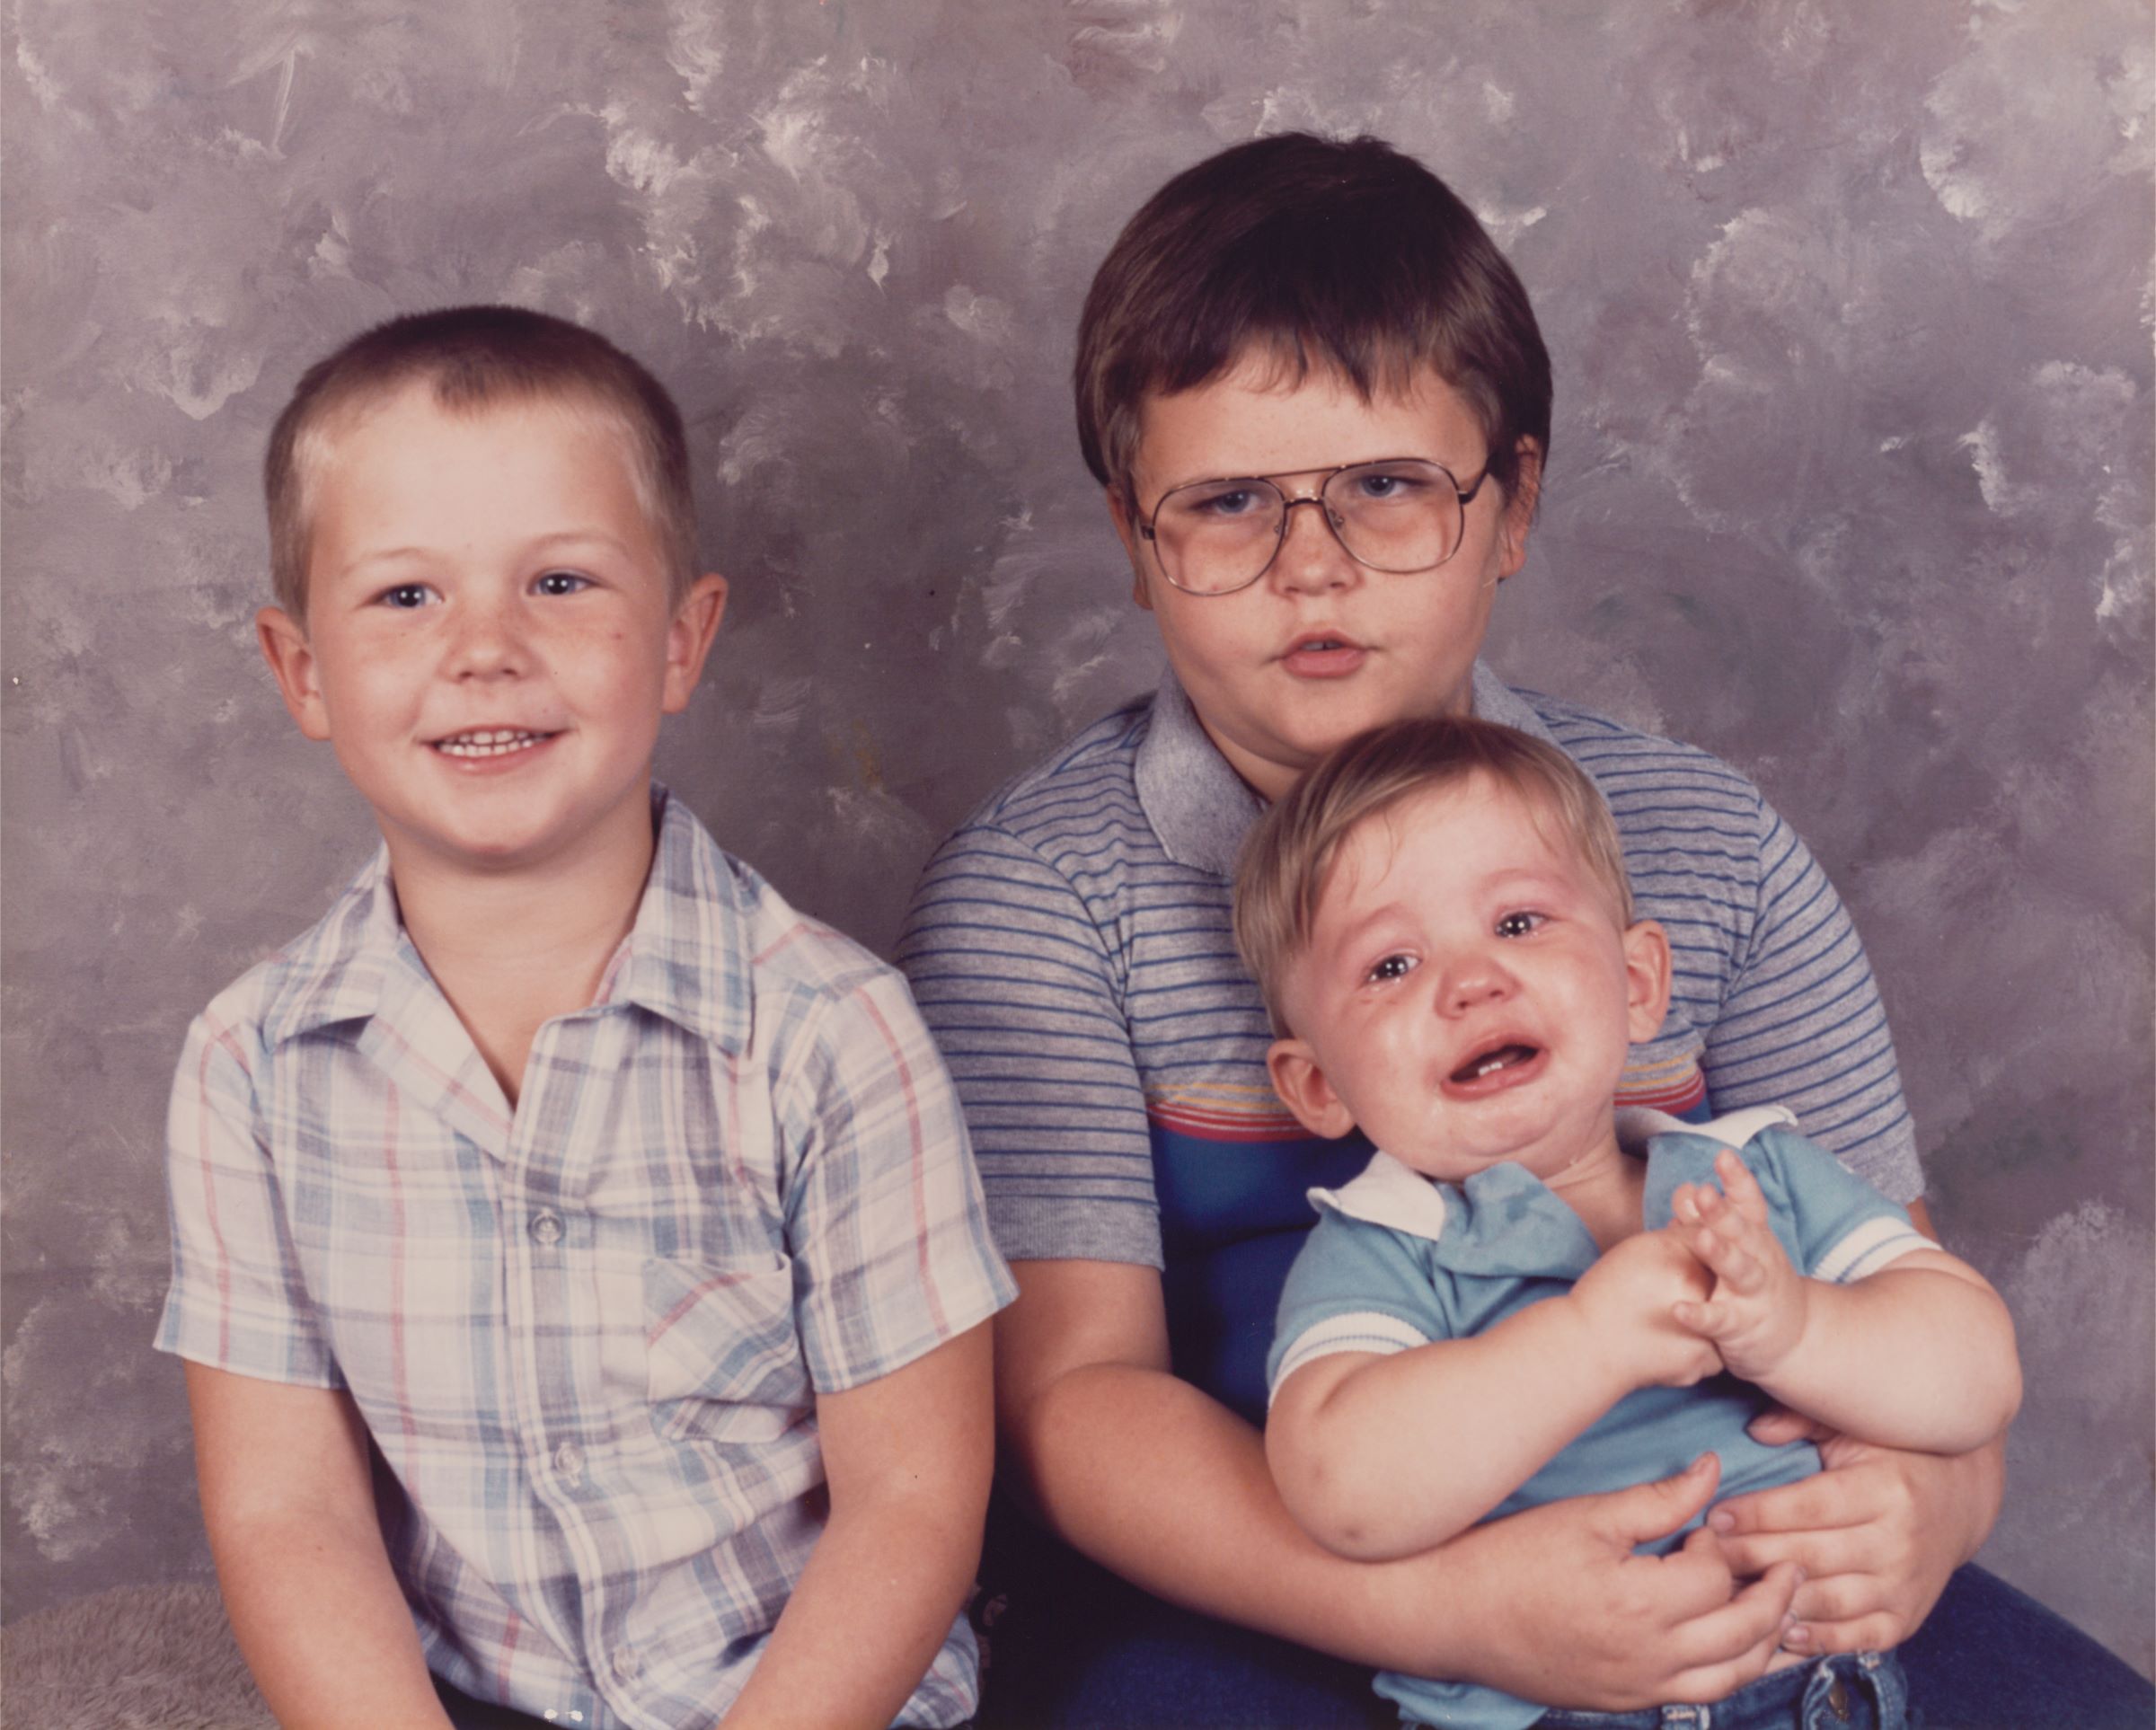 A family portrait showing three young boys, two between the ages of 7 and 10, and one who is a toddler. The boys sit in front of a marbled grey portrait studio background.